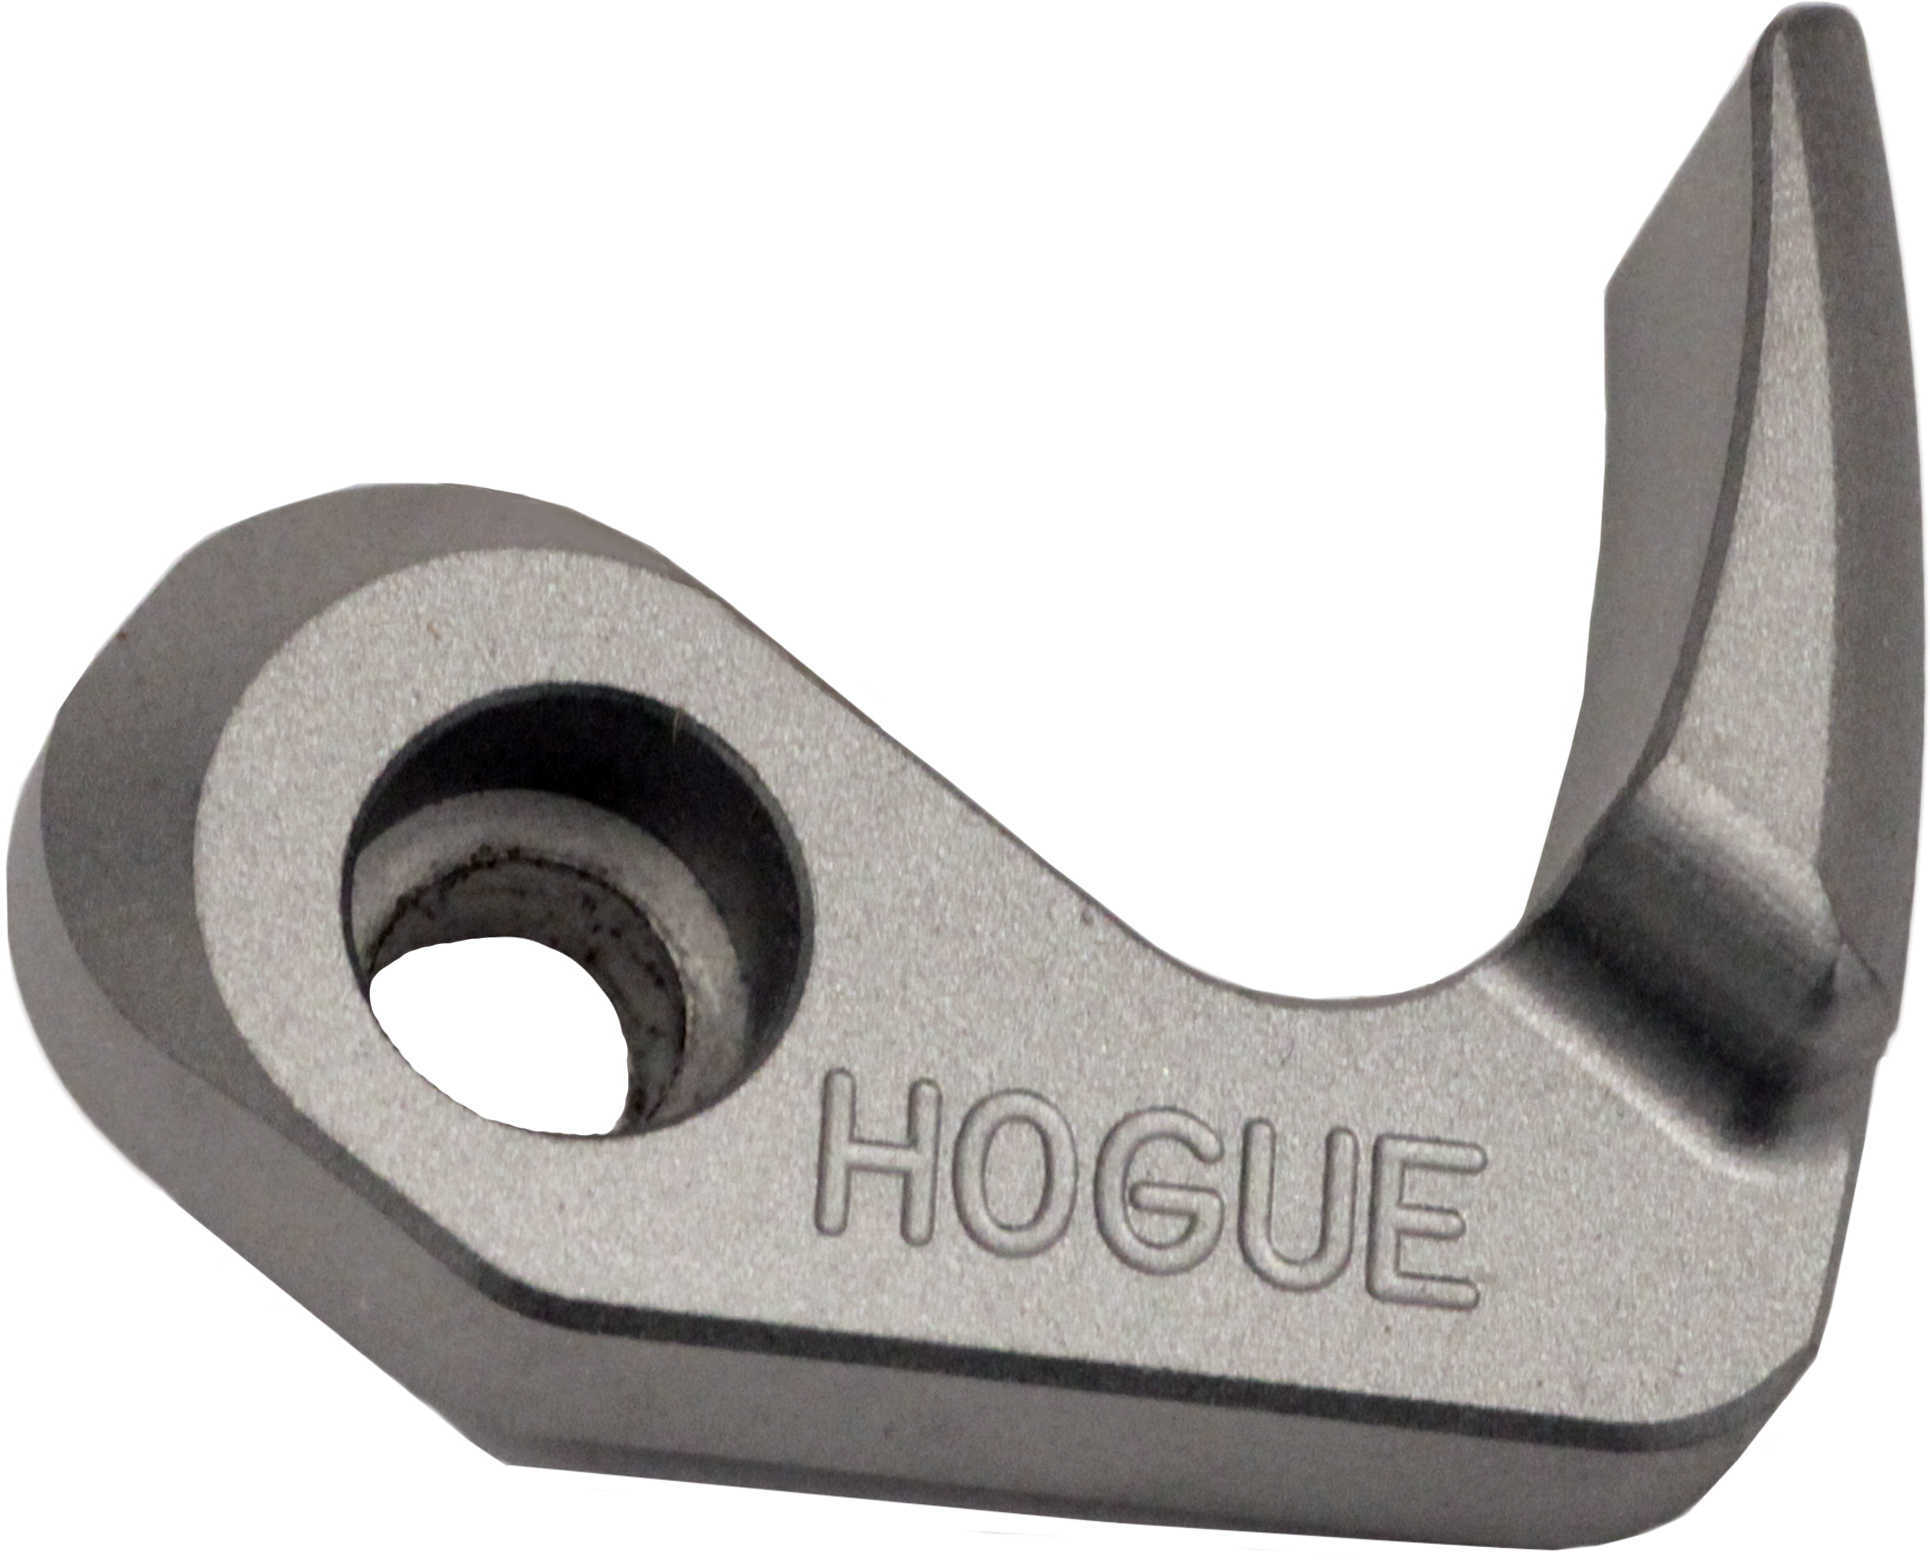 Hogue S&W Cylinder Release Short, Stainless Steel 00684